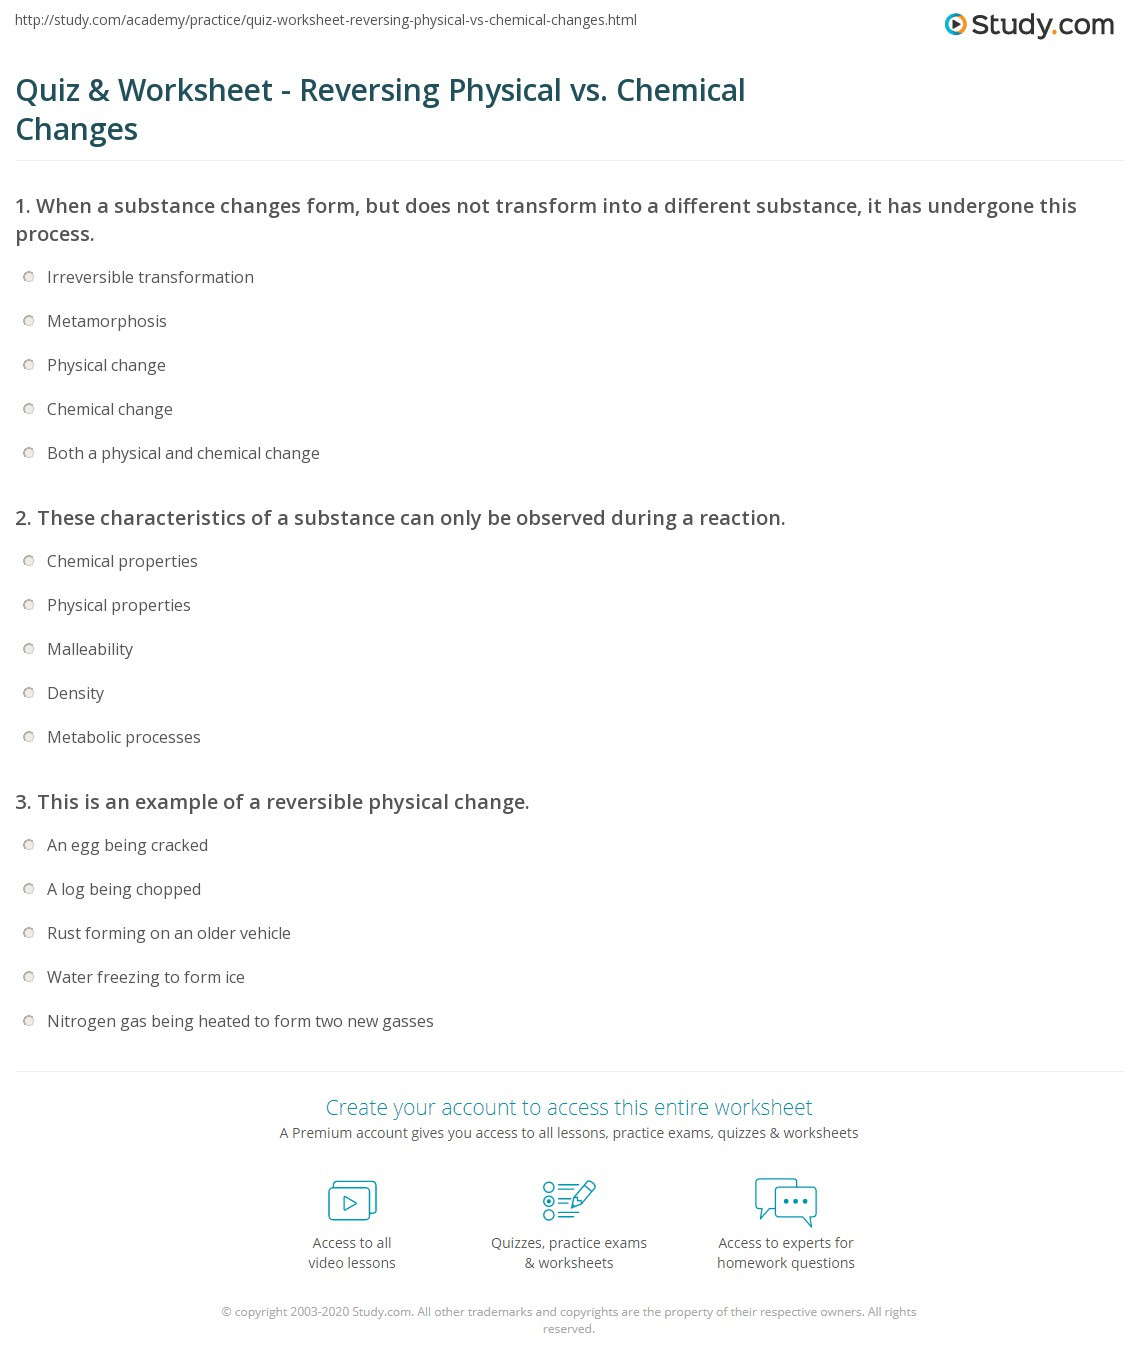 Physical Vs Chemical Changes Worksheet Quiz &amp; Worksheet Reversing Physical Vs Chemical Changes